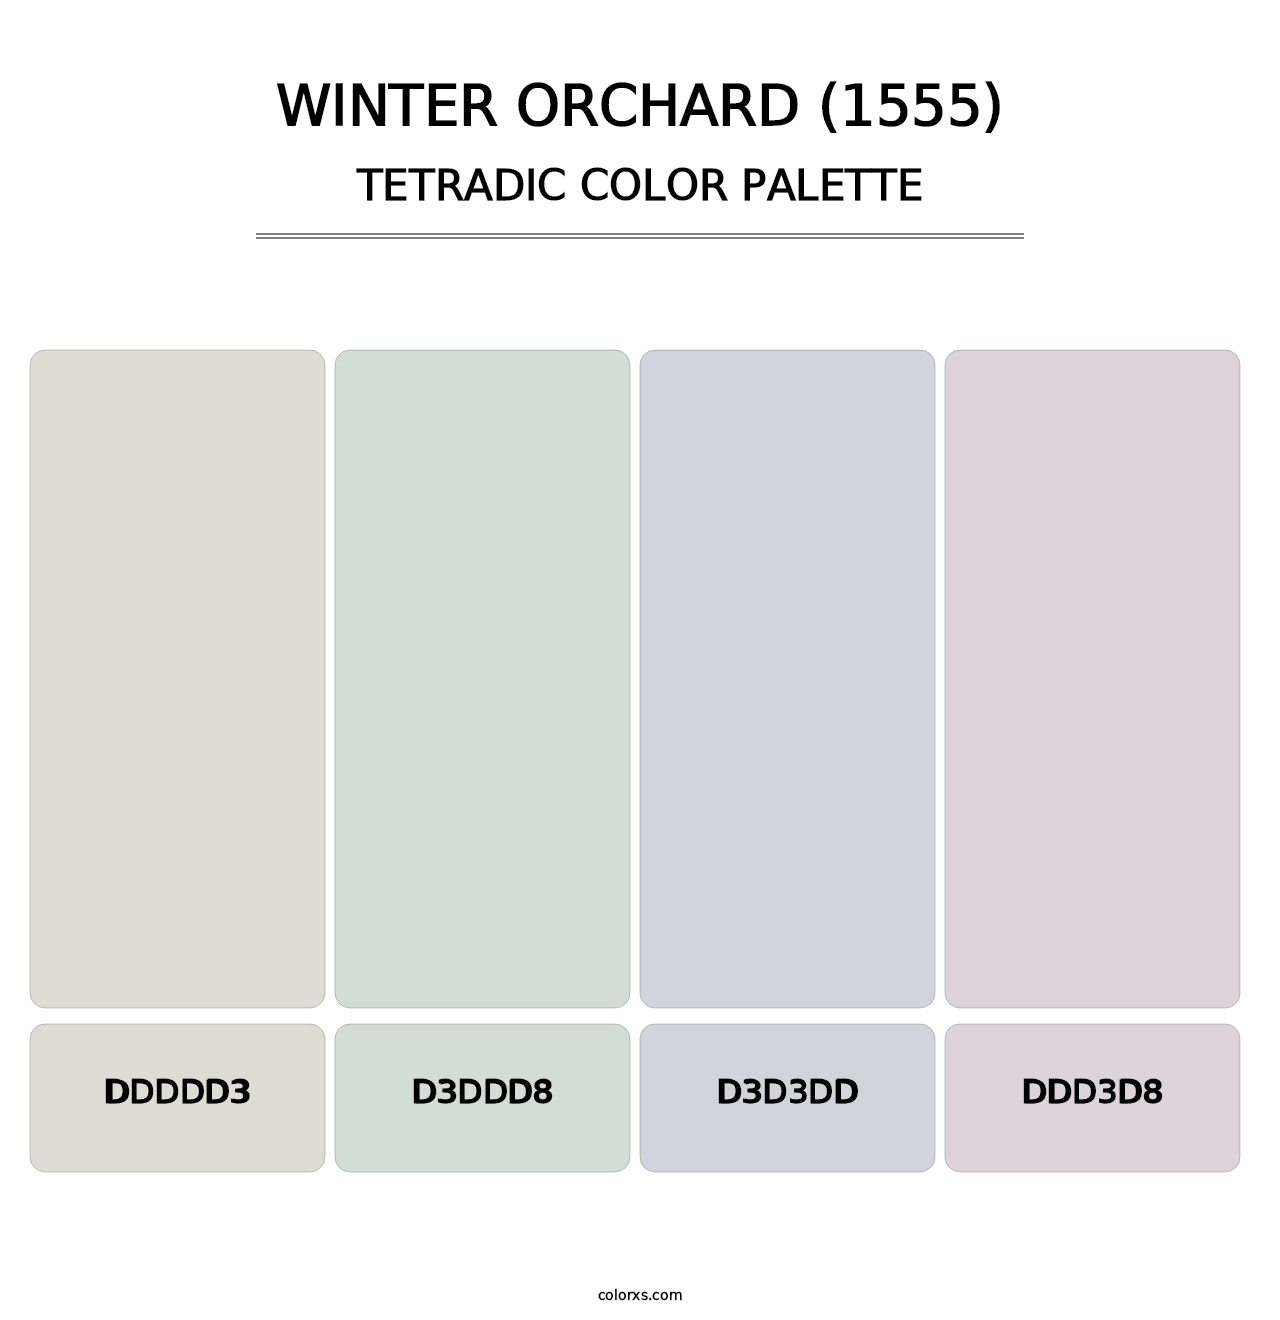 Winter Orchard (1555) - Tetradic Color Palette